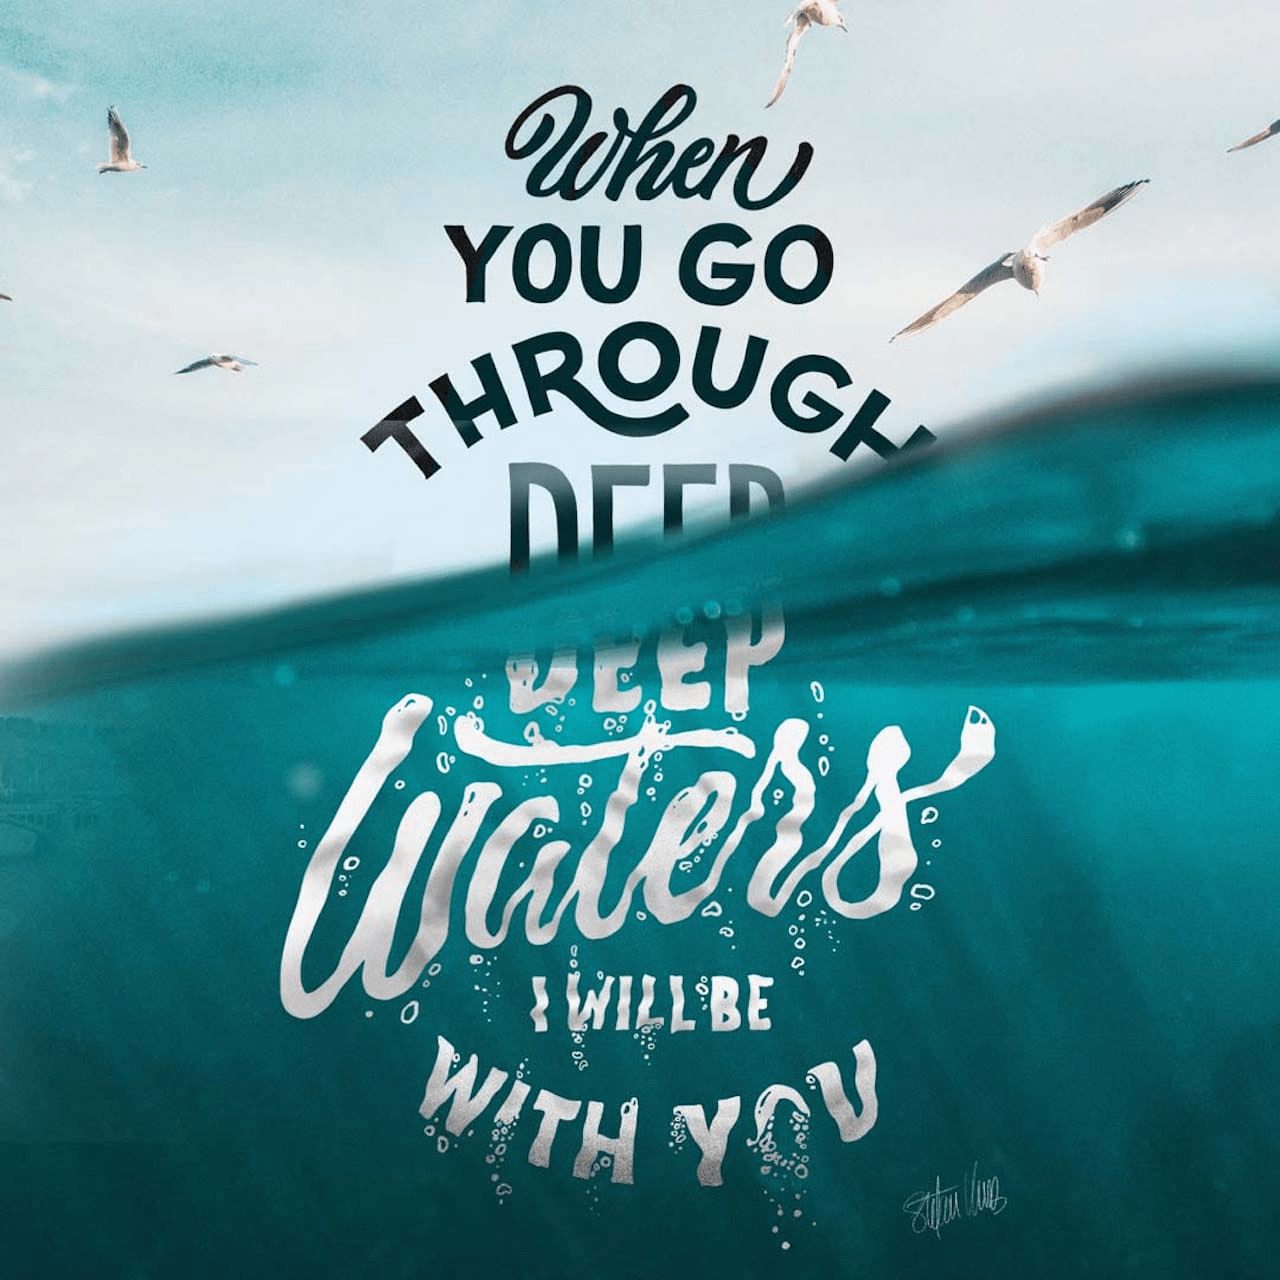 When you go through deep waters, I will be with you picture half under water and half above with birds flying in the air above